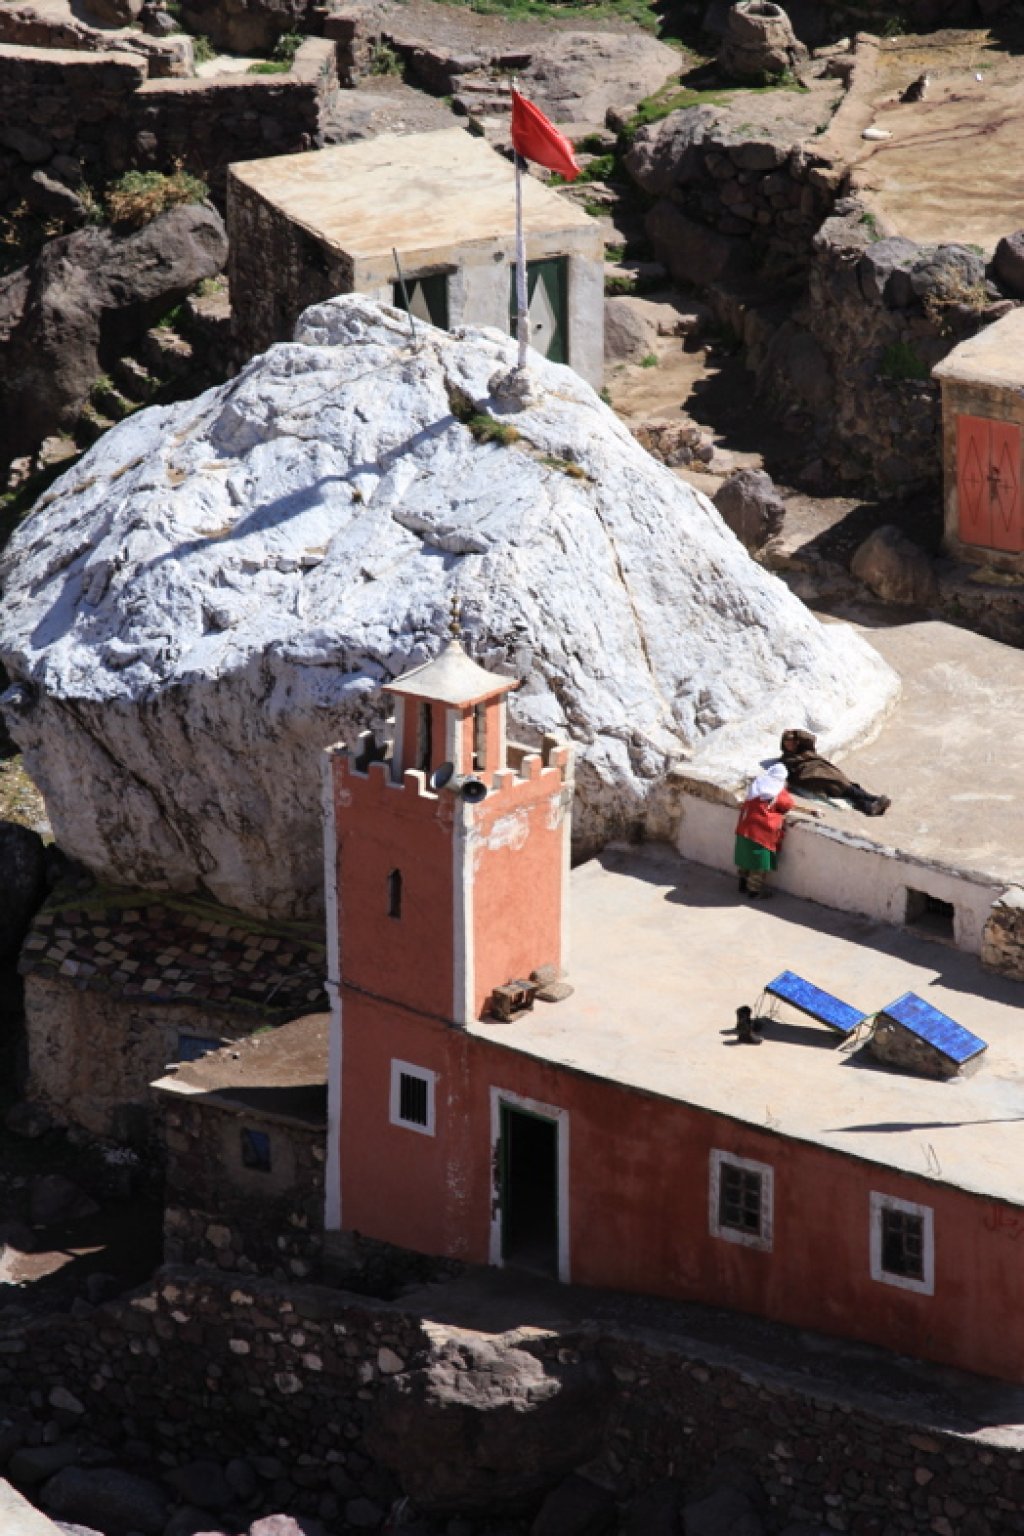 The Sidi Chammharouch monastery with its white-painted rock, which nobody really knows why it is white at all.